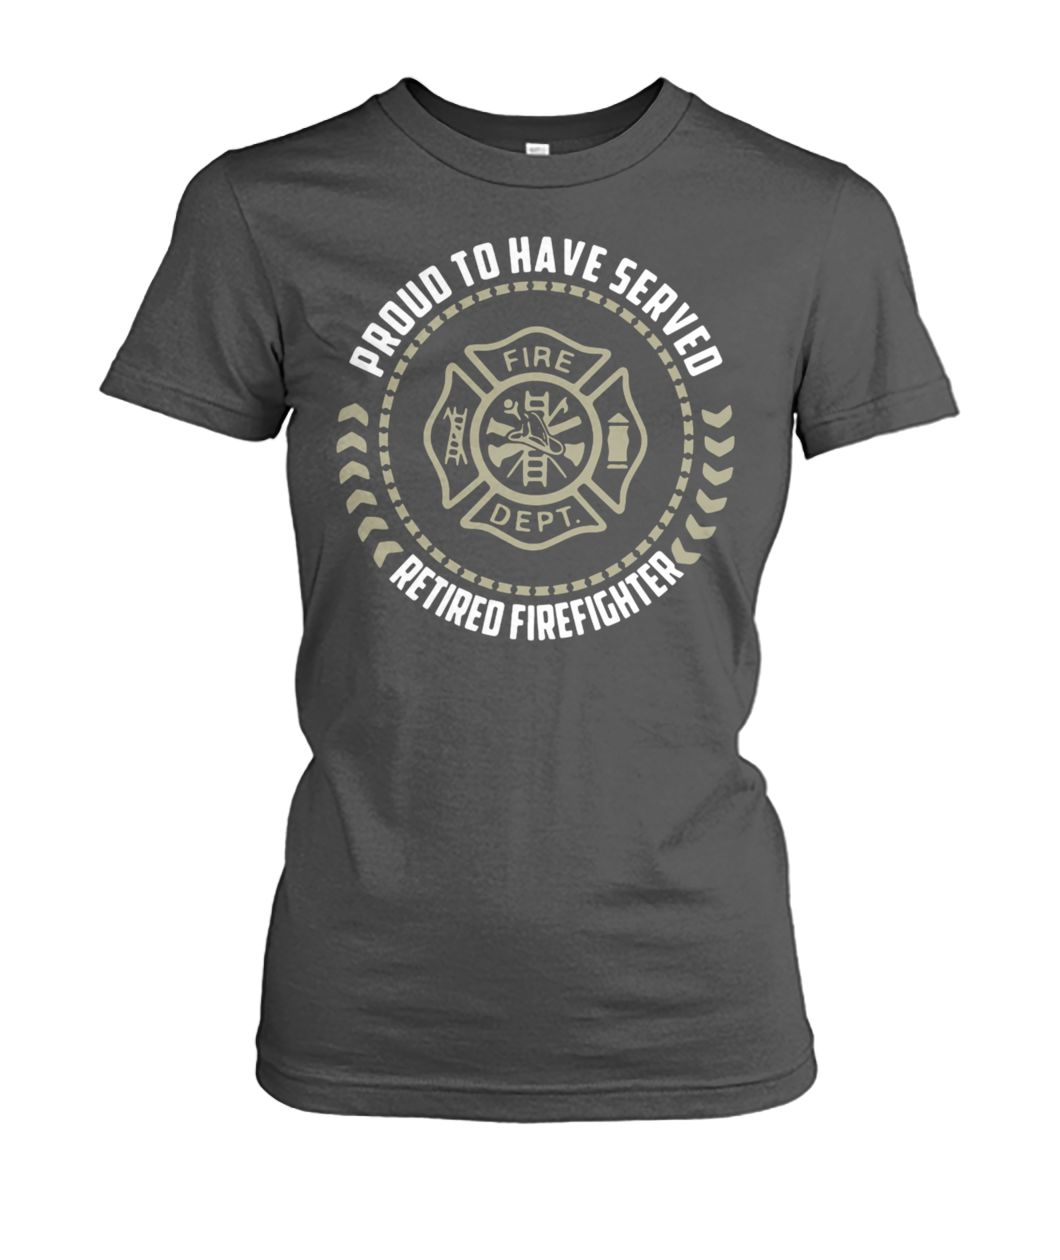 Proud to have served retired firefighter women's crew tee